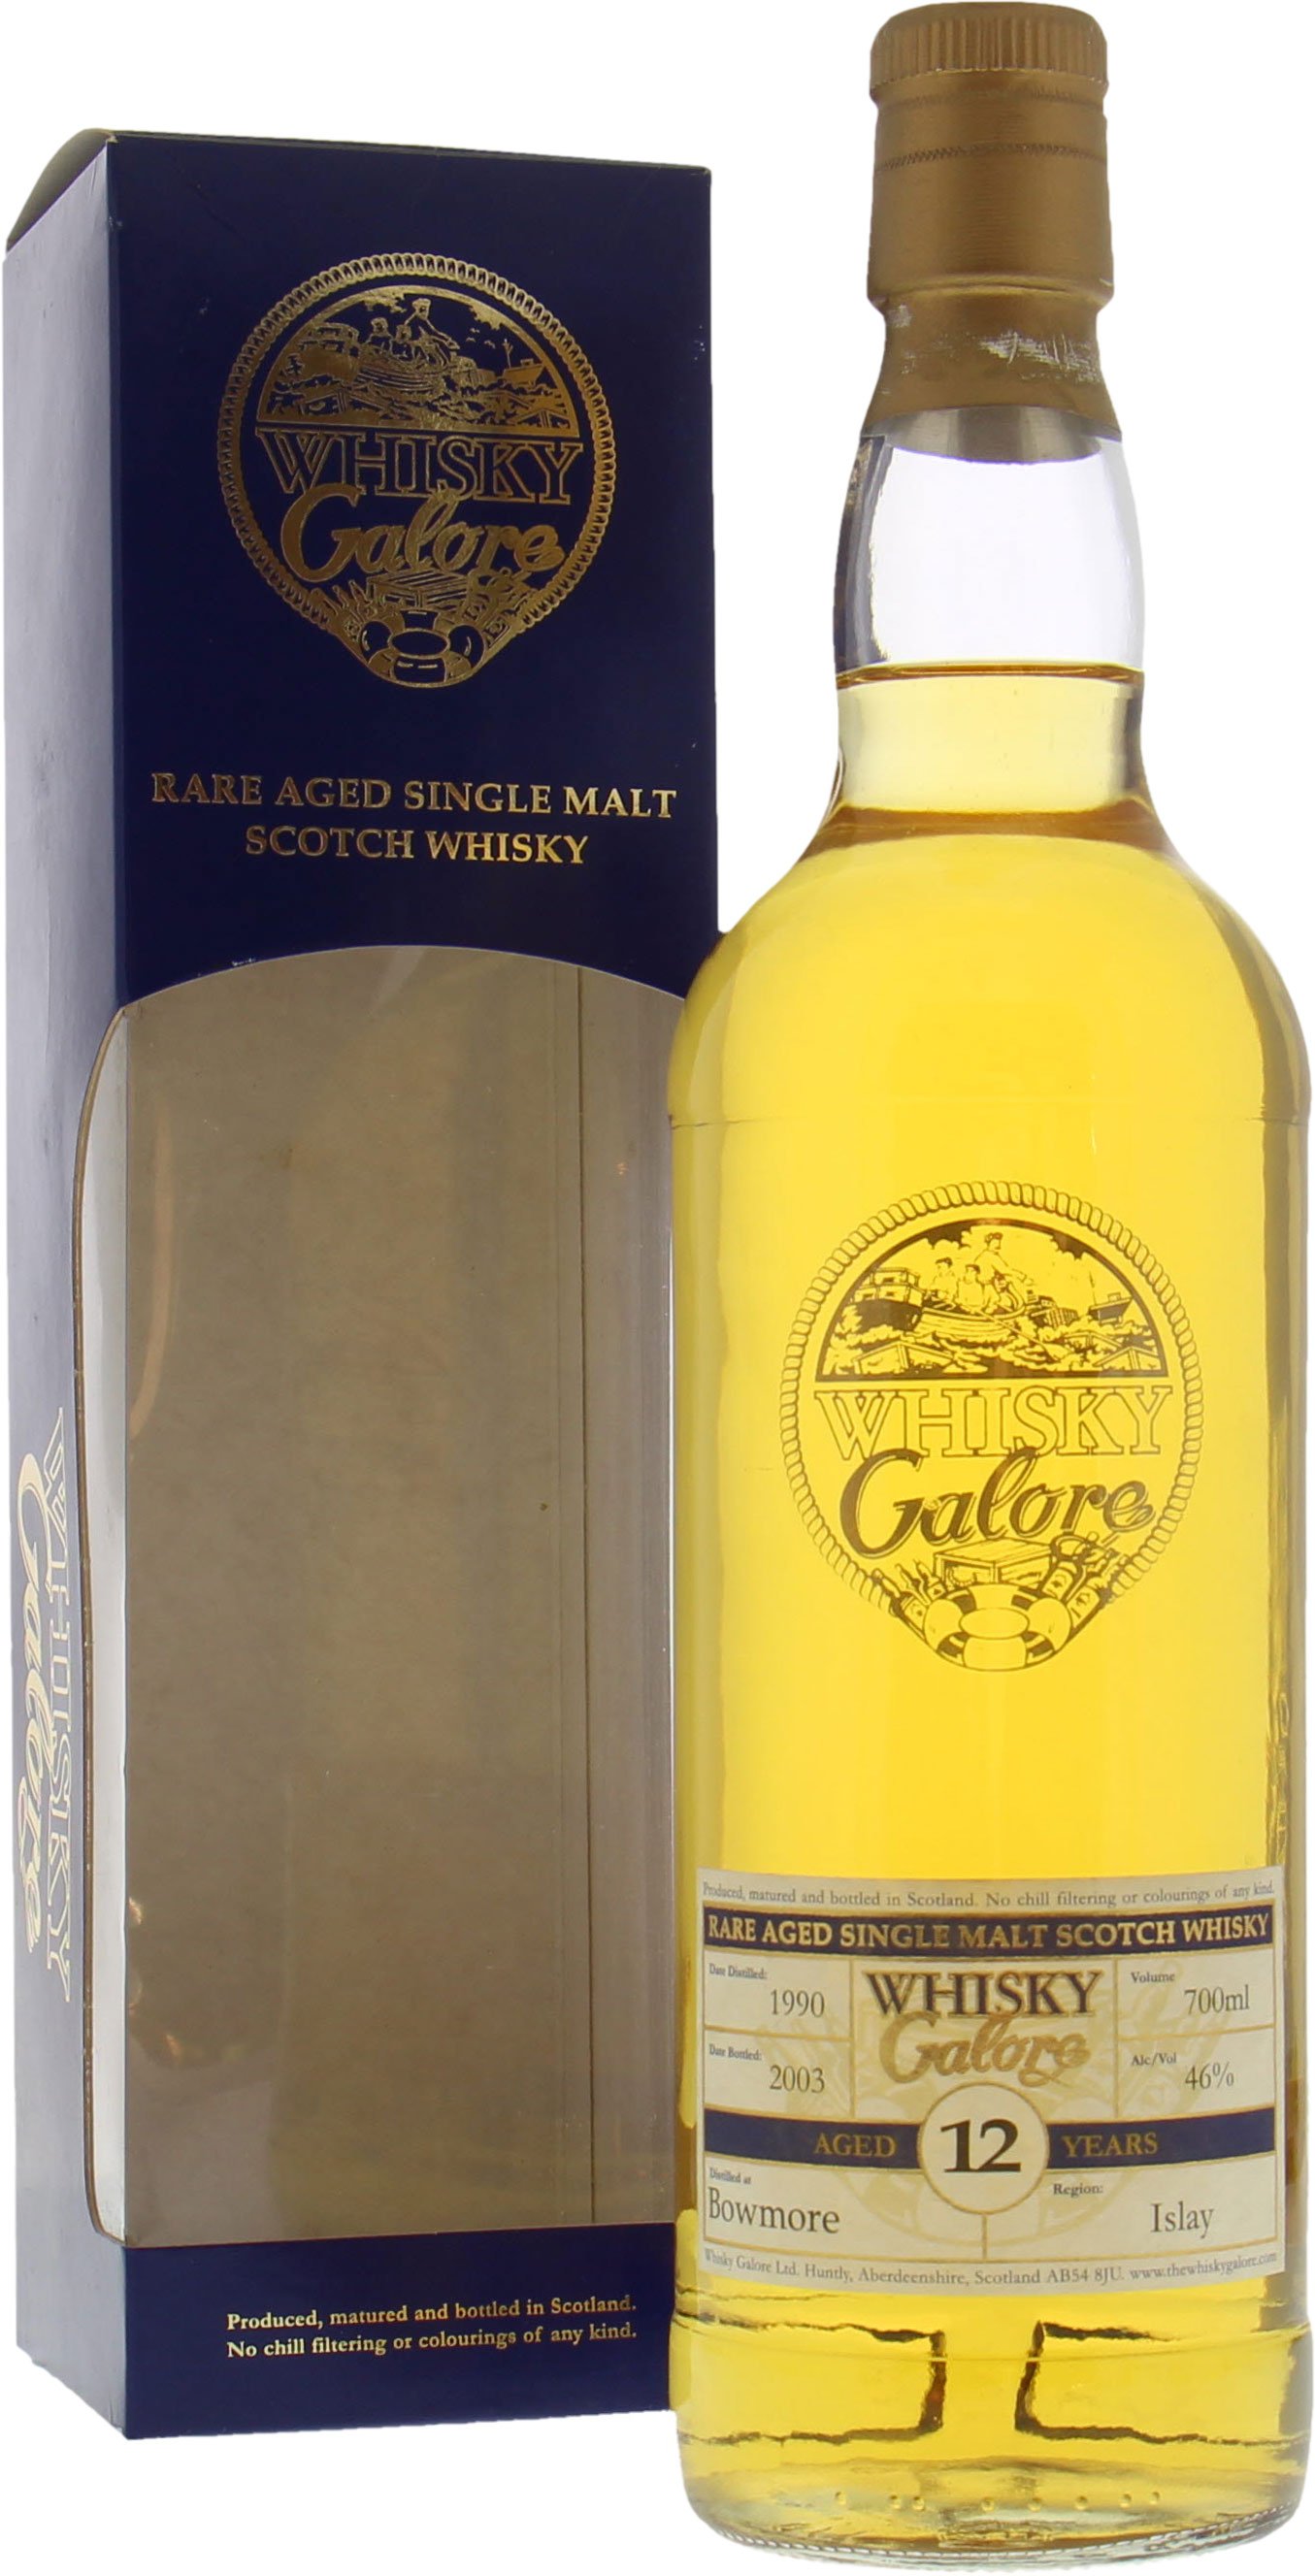 Bowmore - Whisky Galore 11 Years Old Duncan Taylor 46% 1990